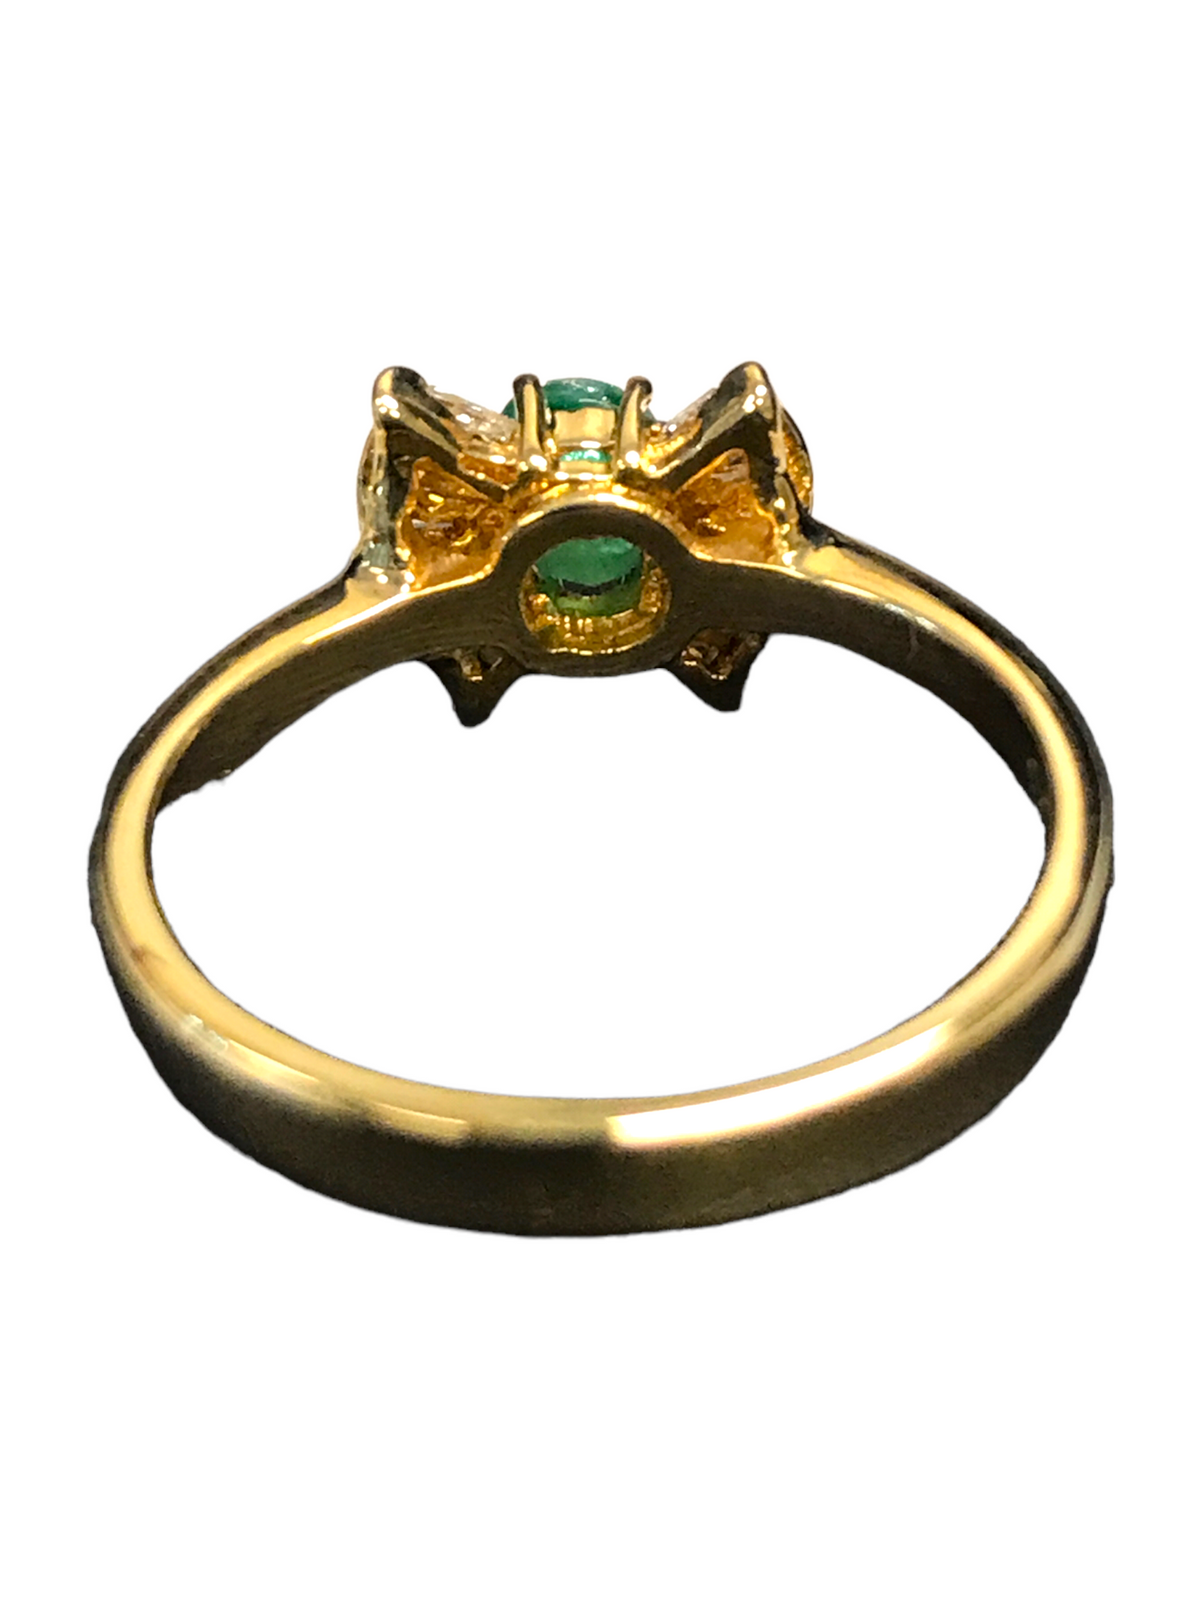 14k Yellow Gold Emerald and Diamond Ladies Ring Size 6.5(US)